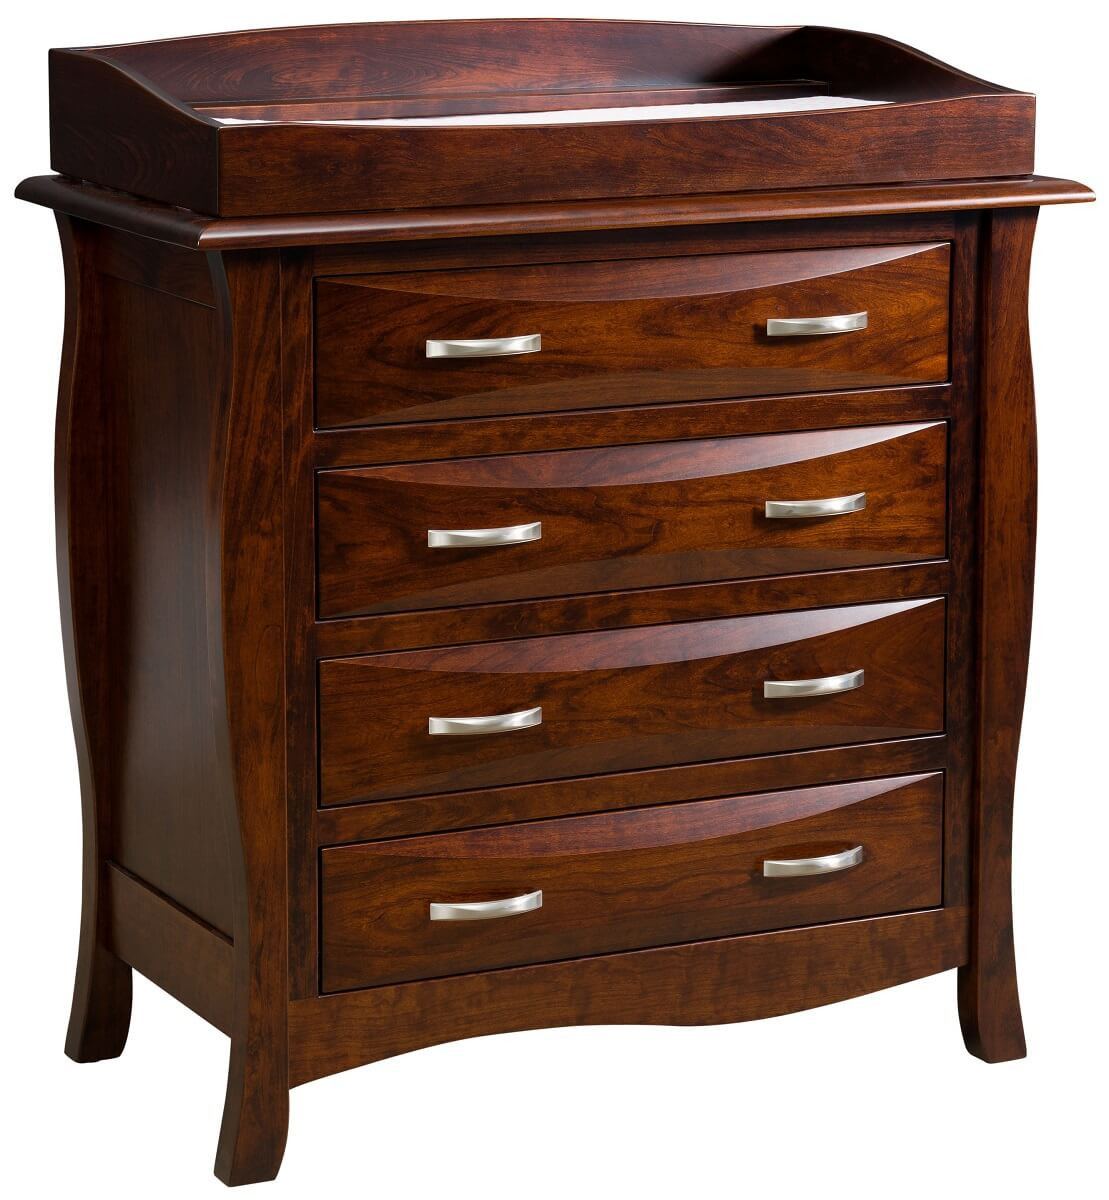 Hardwood Chest with Changing Table Topper